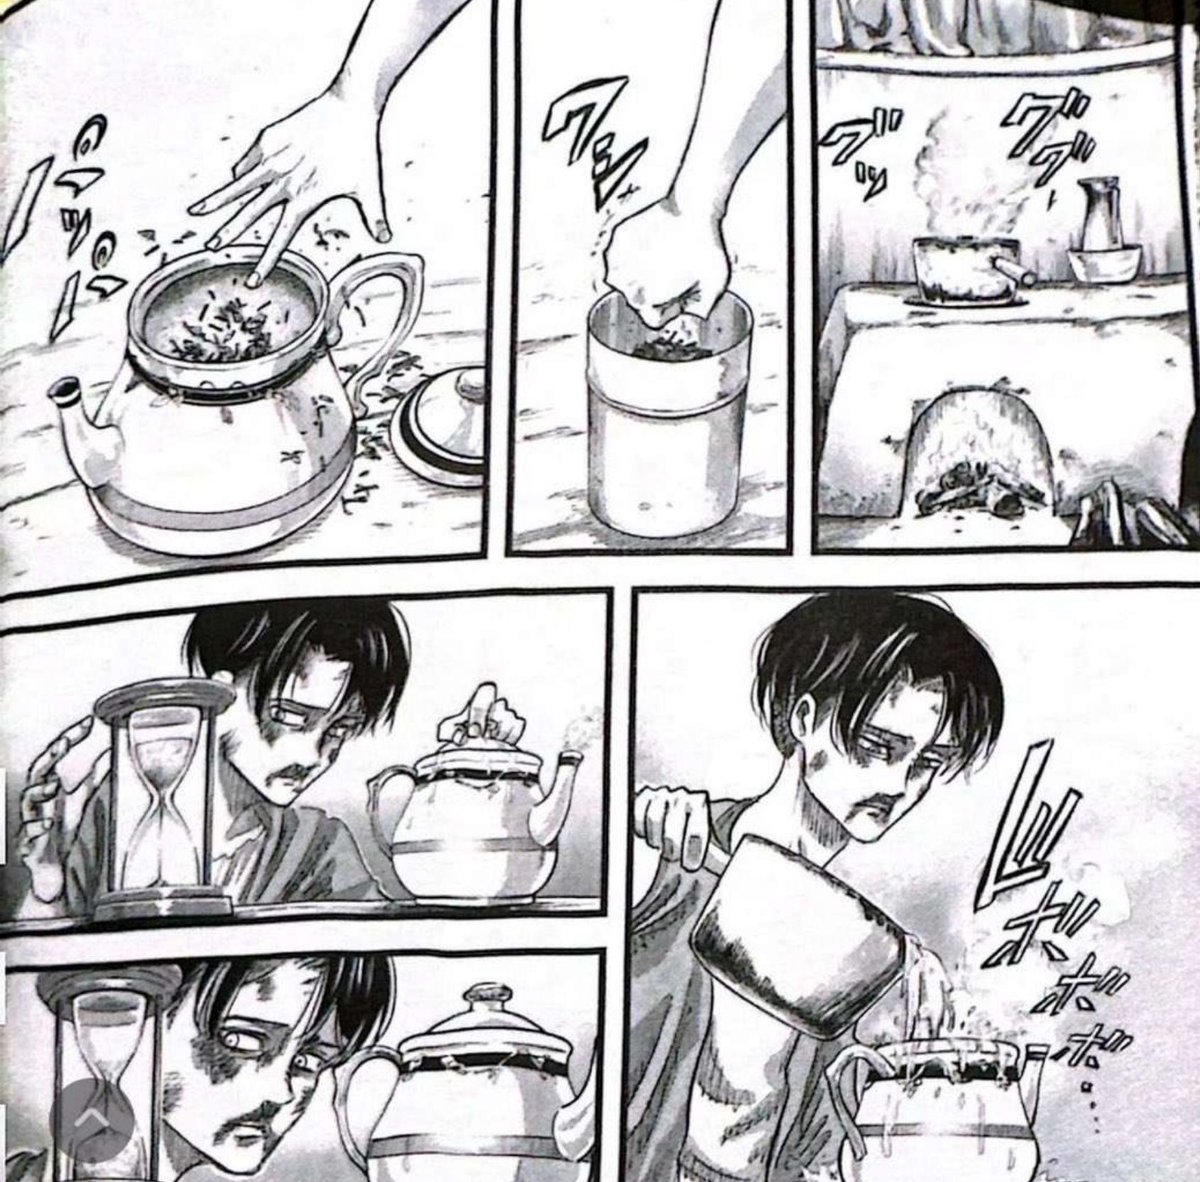 all beaten up levi prepares tea after his mother passed away 💔 #LeviBadBoy